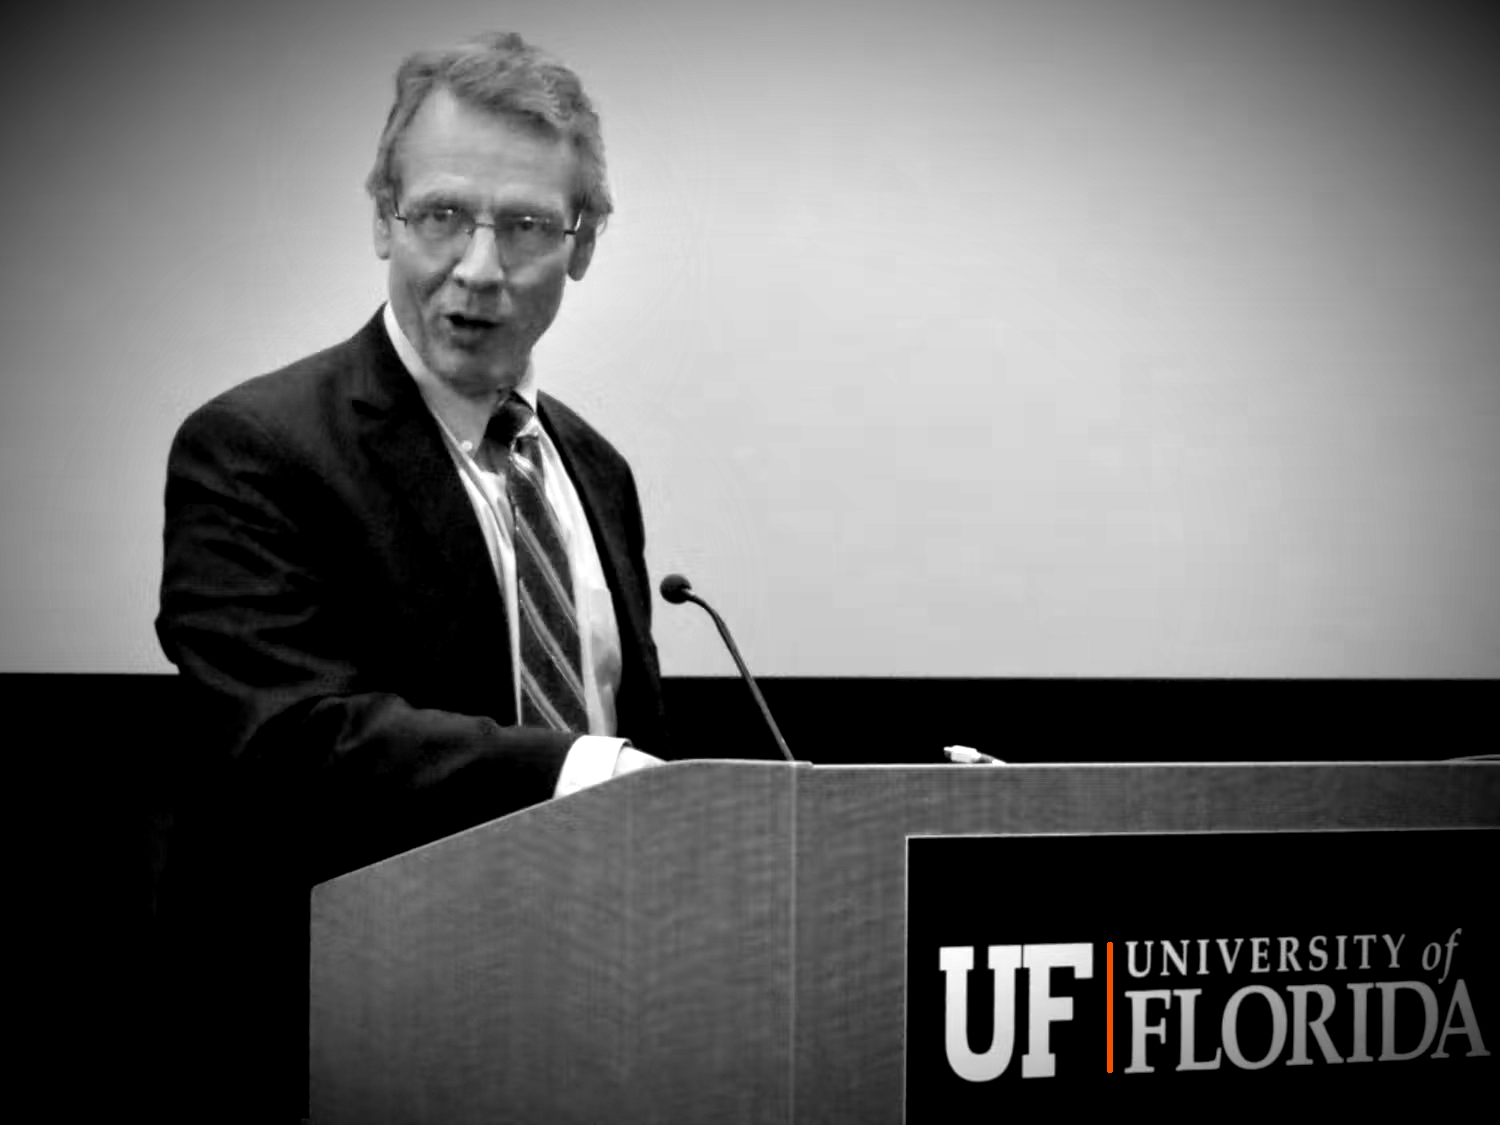 David Parrott at UF speaking and teaching at the podium in black and white with an orange vertical stripe standing out on the front of the wooden podiumj. Dr. Parrott has one hand pointed down and his head cocked to the side above the microphone as he speaks authoritatively.